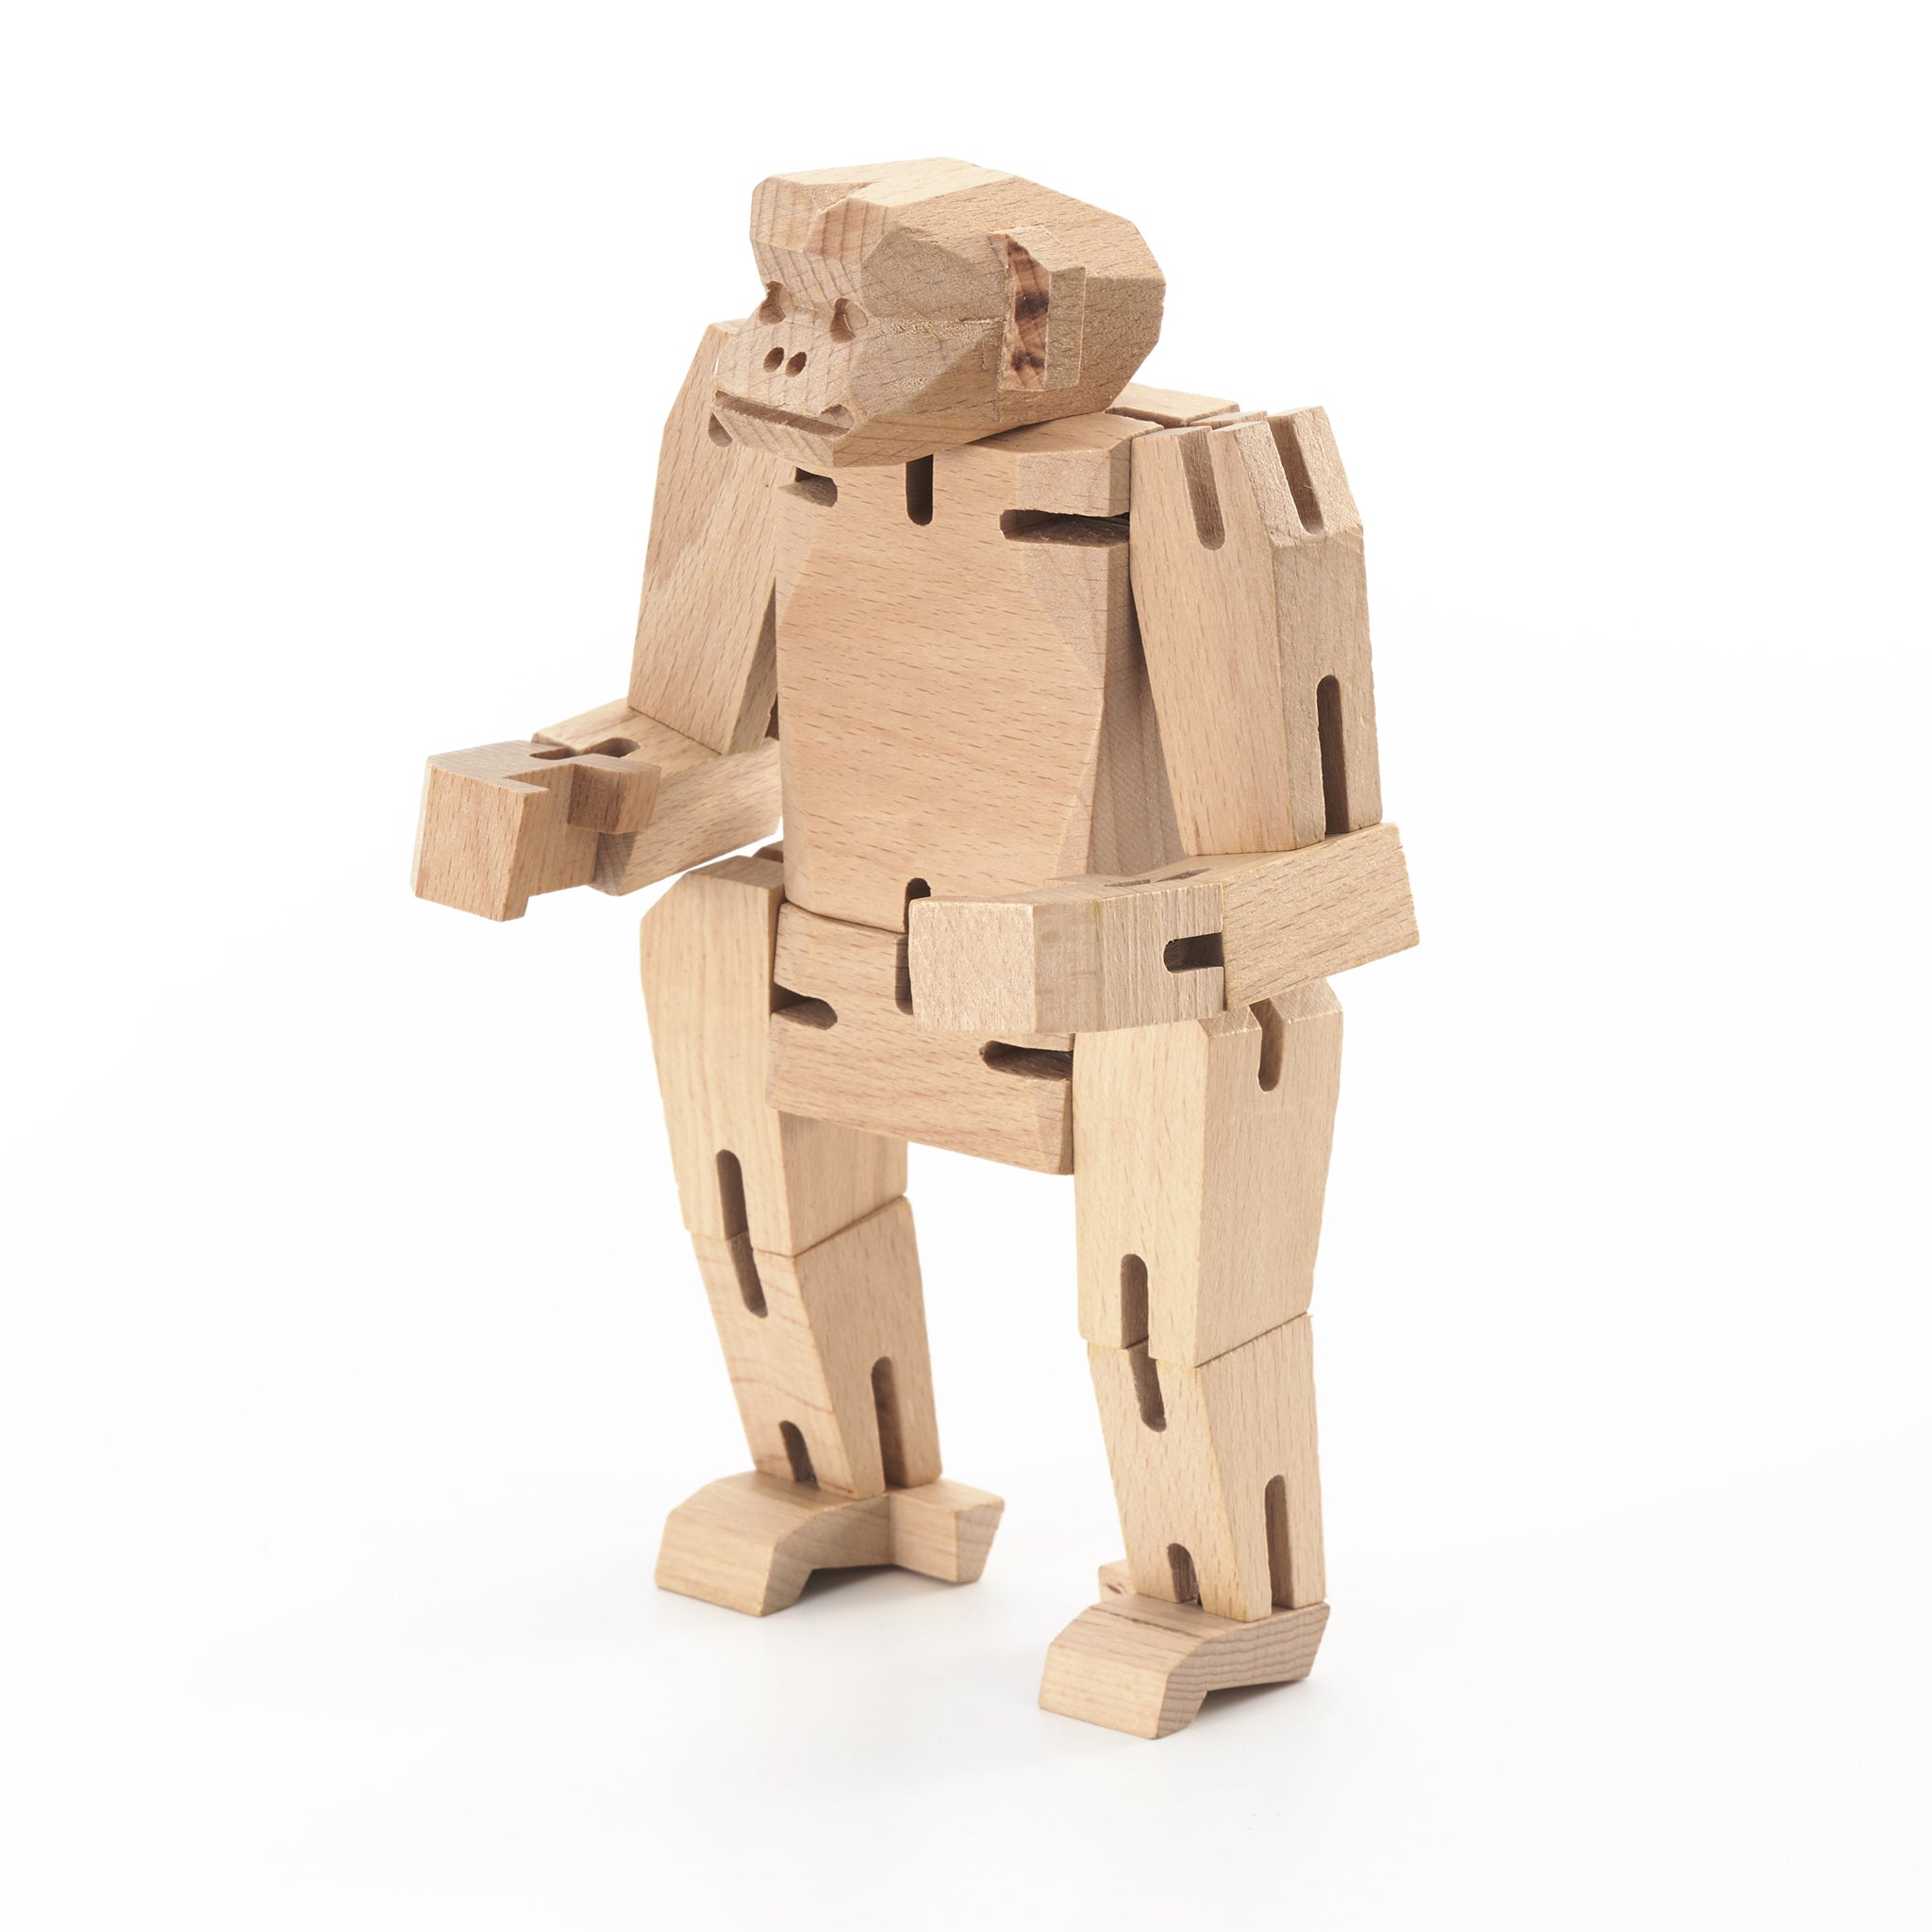 Morphits ® Monkey Wooden Toy: Unleash Creativity with Poseable Wooden Playset - Yoshiaki Ito Design Stand N1